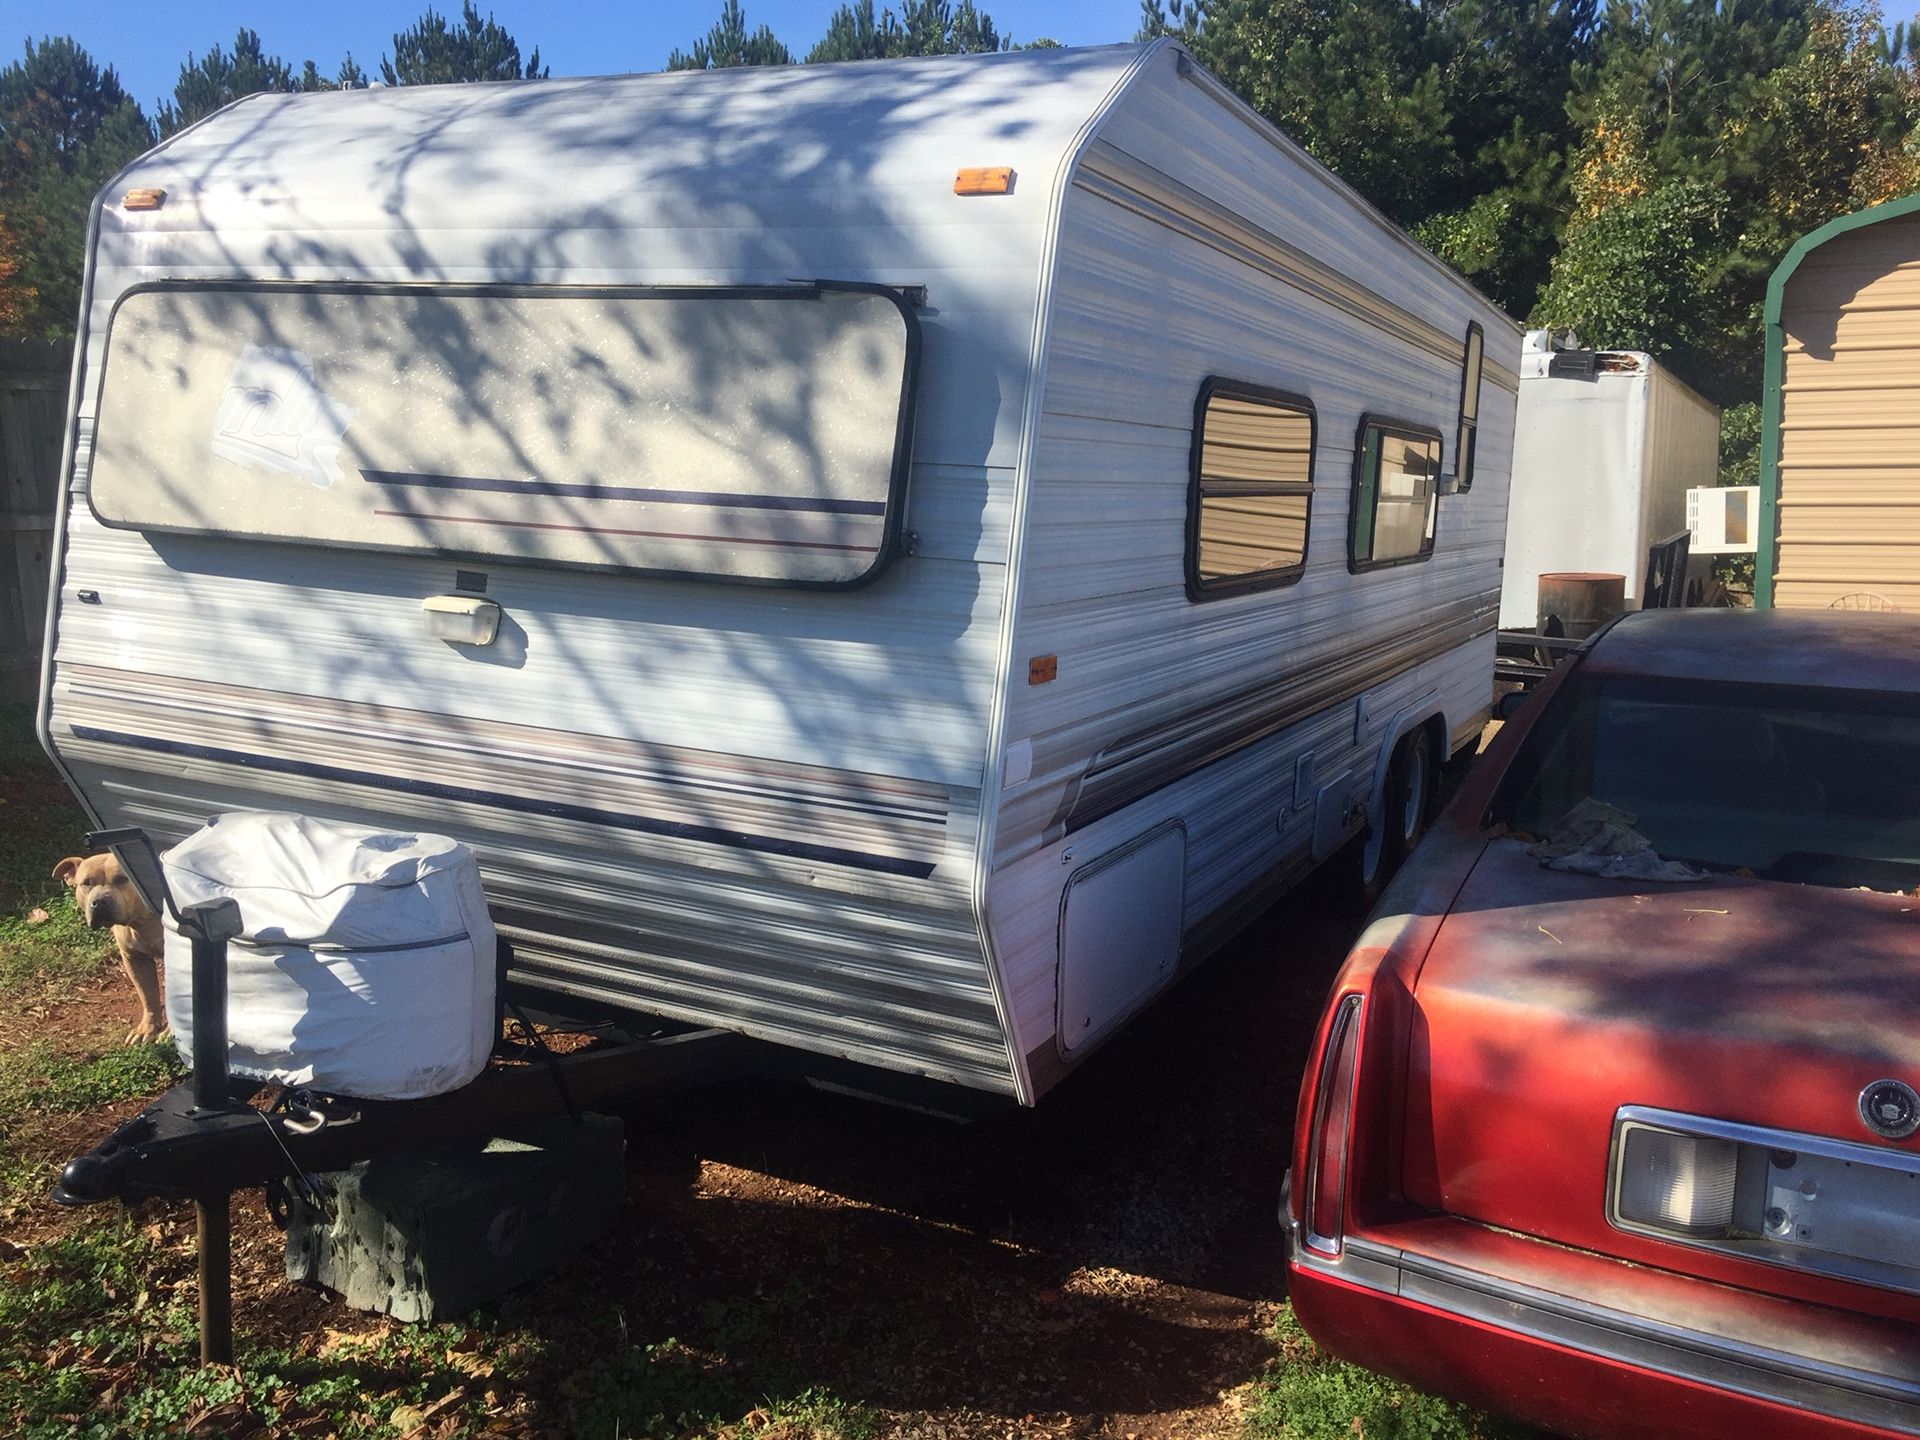 2002 sunline lite everything works heat ac refrigerator sinks stove over great camper at great price $6000